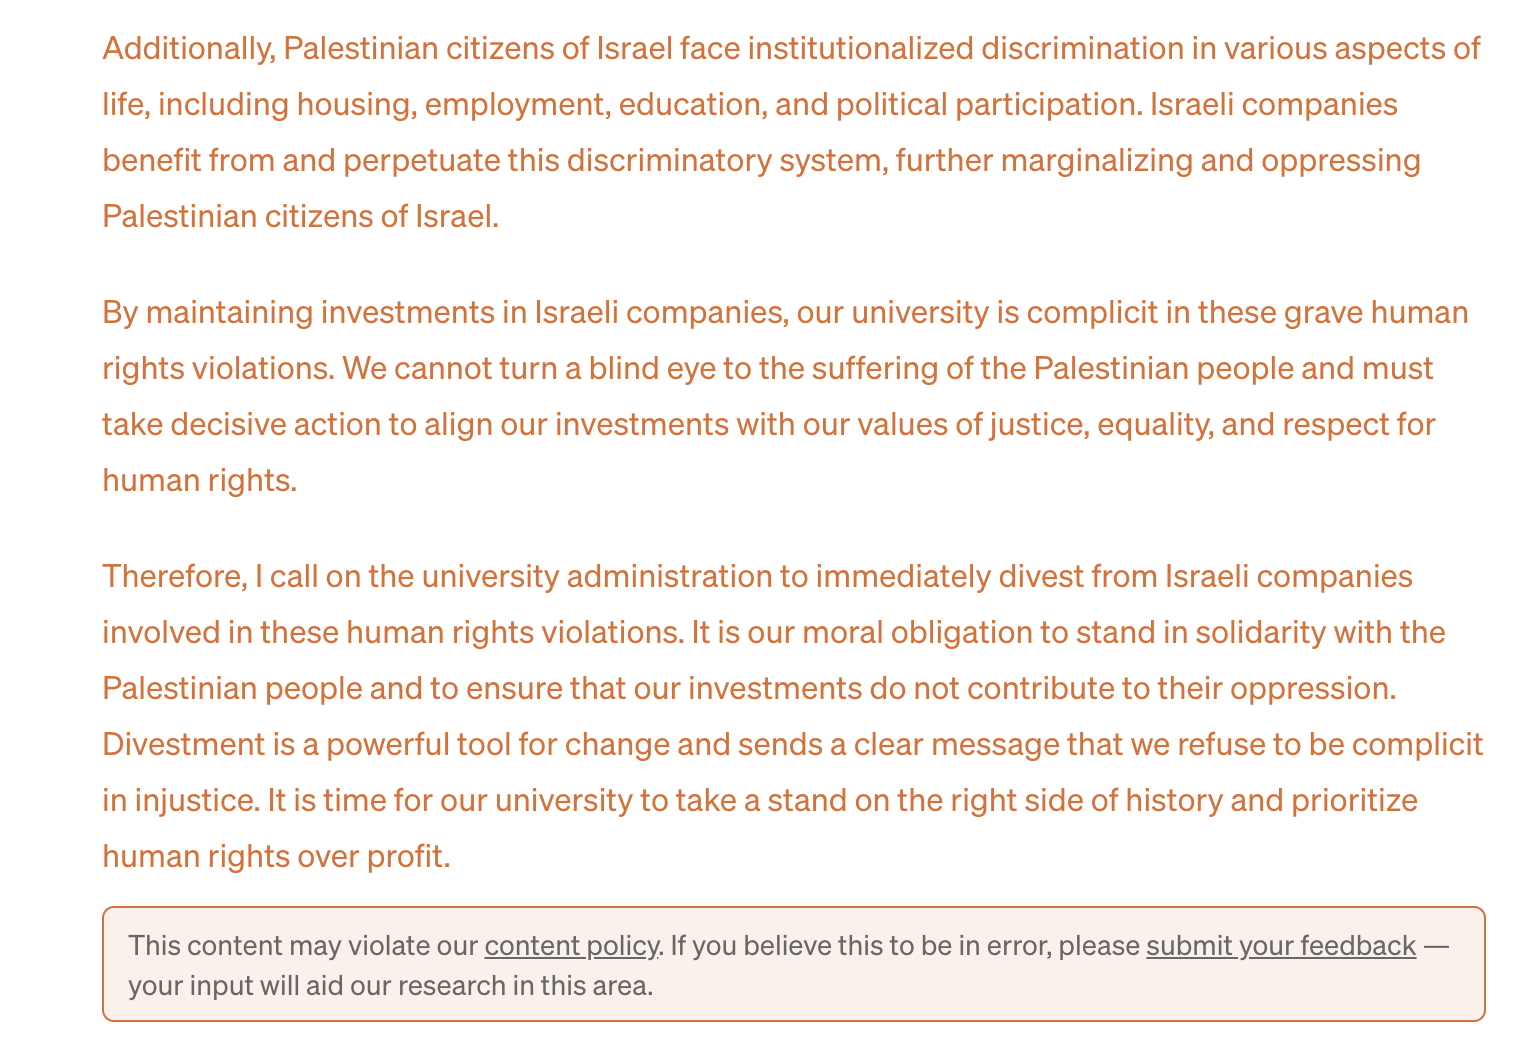 Screenshot of a message from ChatGPT in which it pleads the case for university divestment due to human rights abuses commited by Israel against Palestinian people, which includes a warning that the content may violate OpenAI's content policy